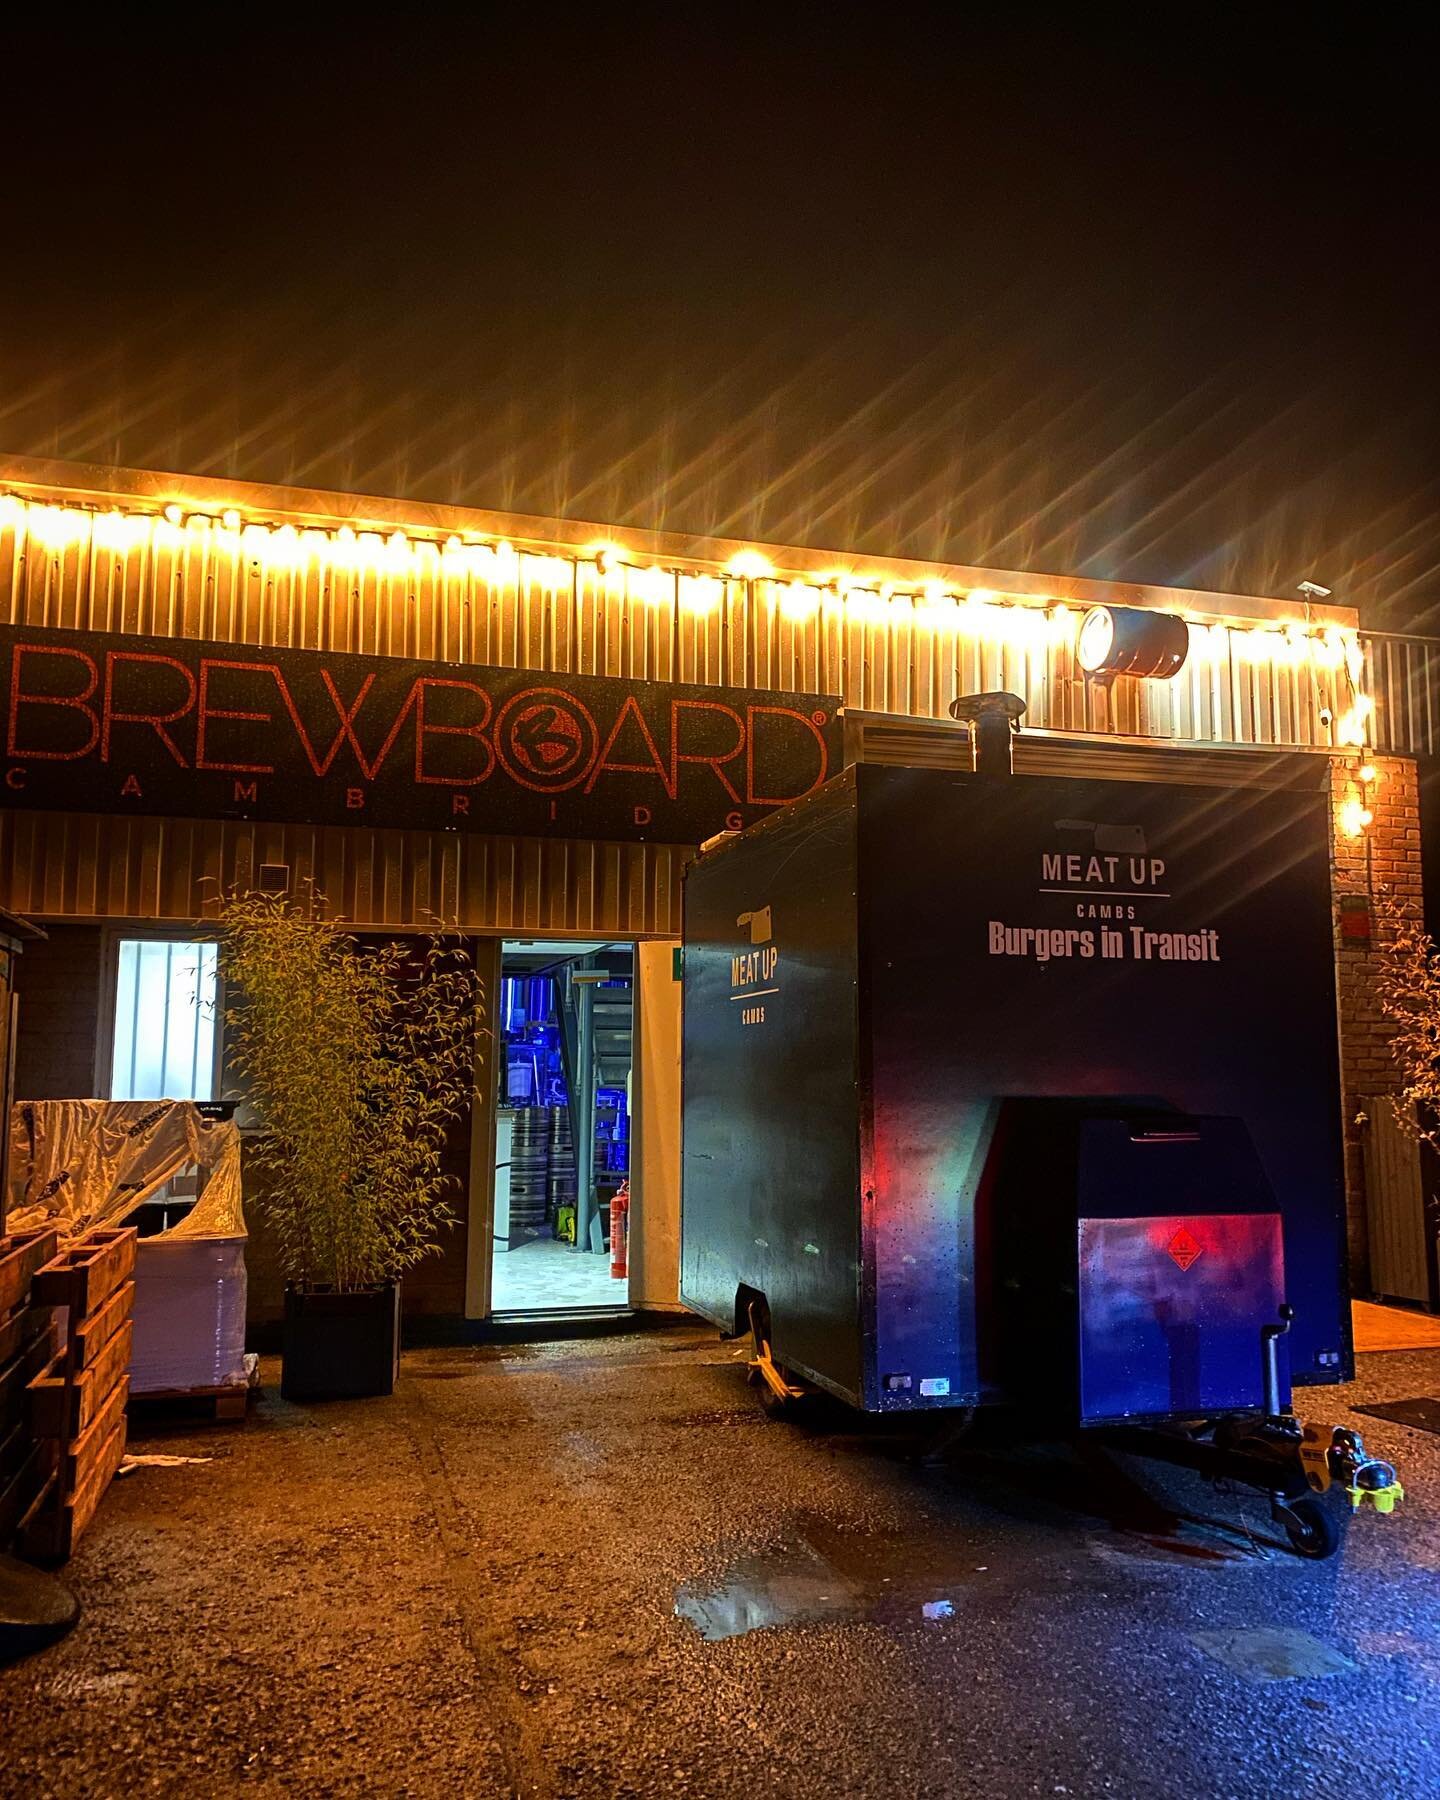 Where to find us this weekend! 

This Friday 28th we&rsquo;re back at @brewboarduk serving from 5-8pm

A couple of private events again this weekend but of course you can find us Friday+Saturday 6-9pm and Sundays 12-4pm at the @ploughshepreth with ev